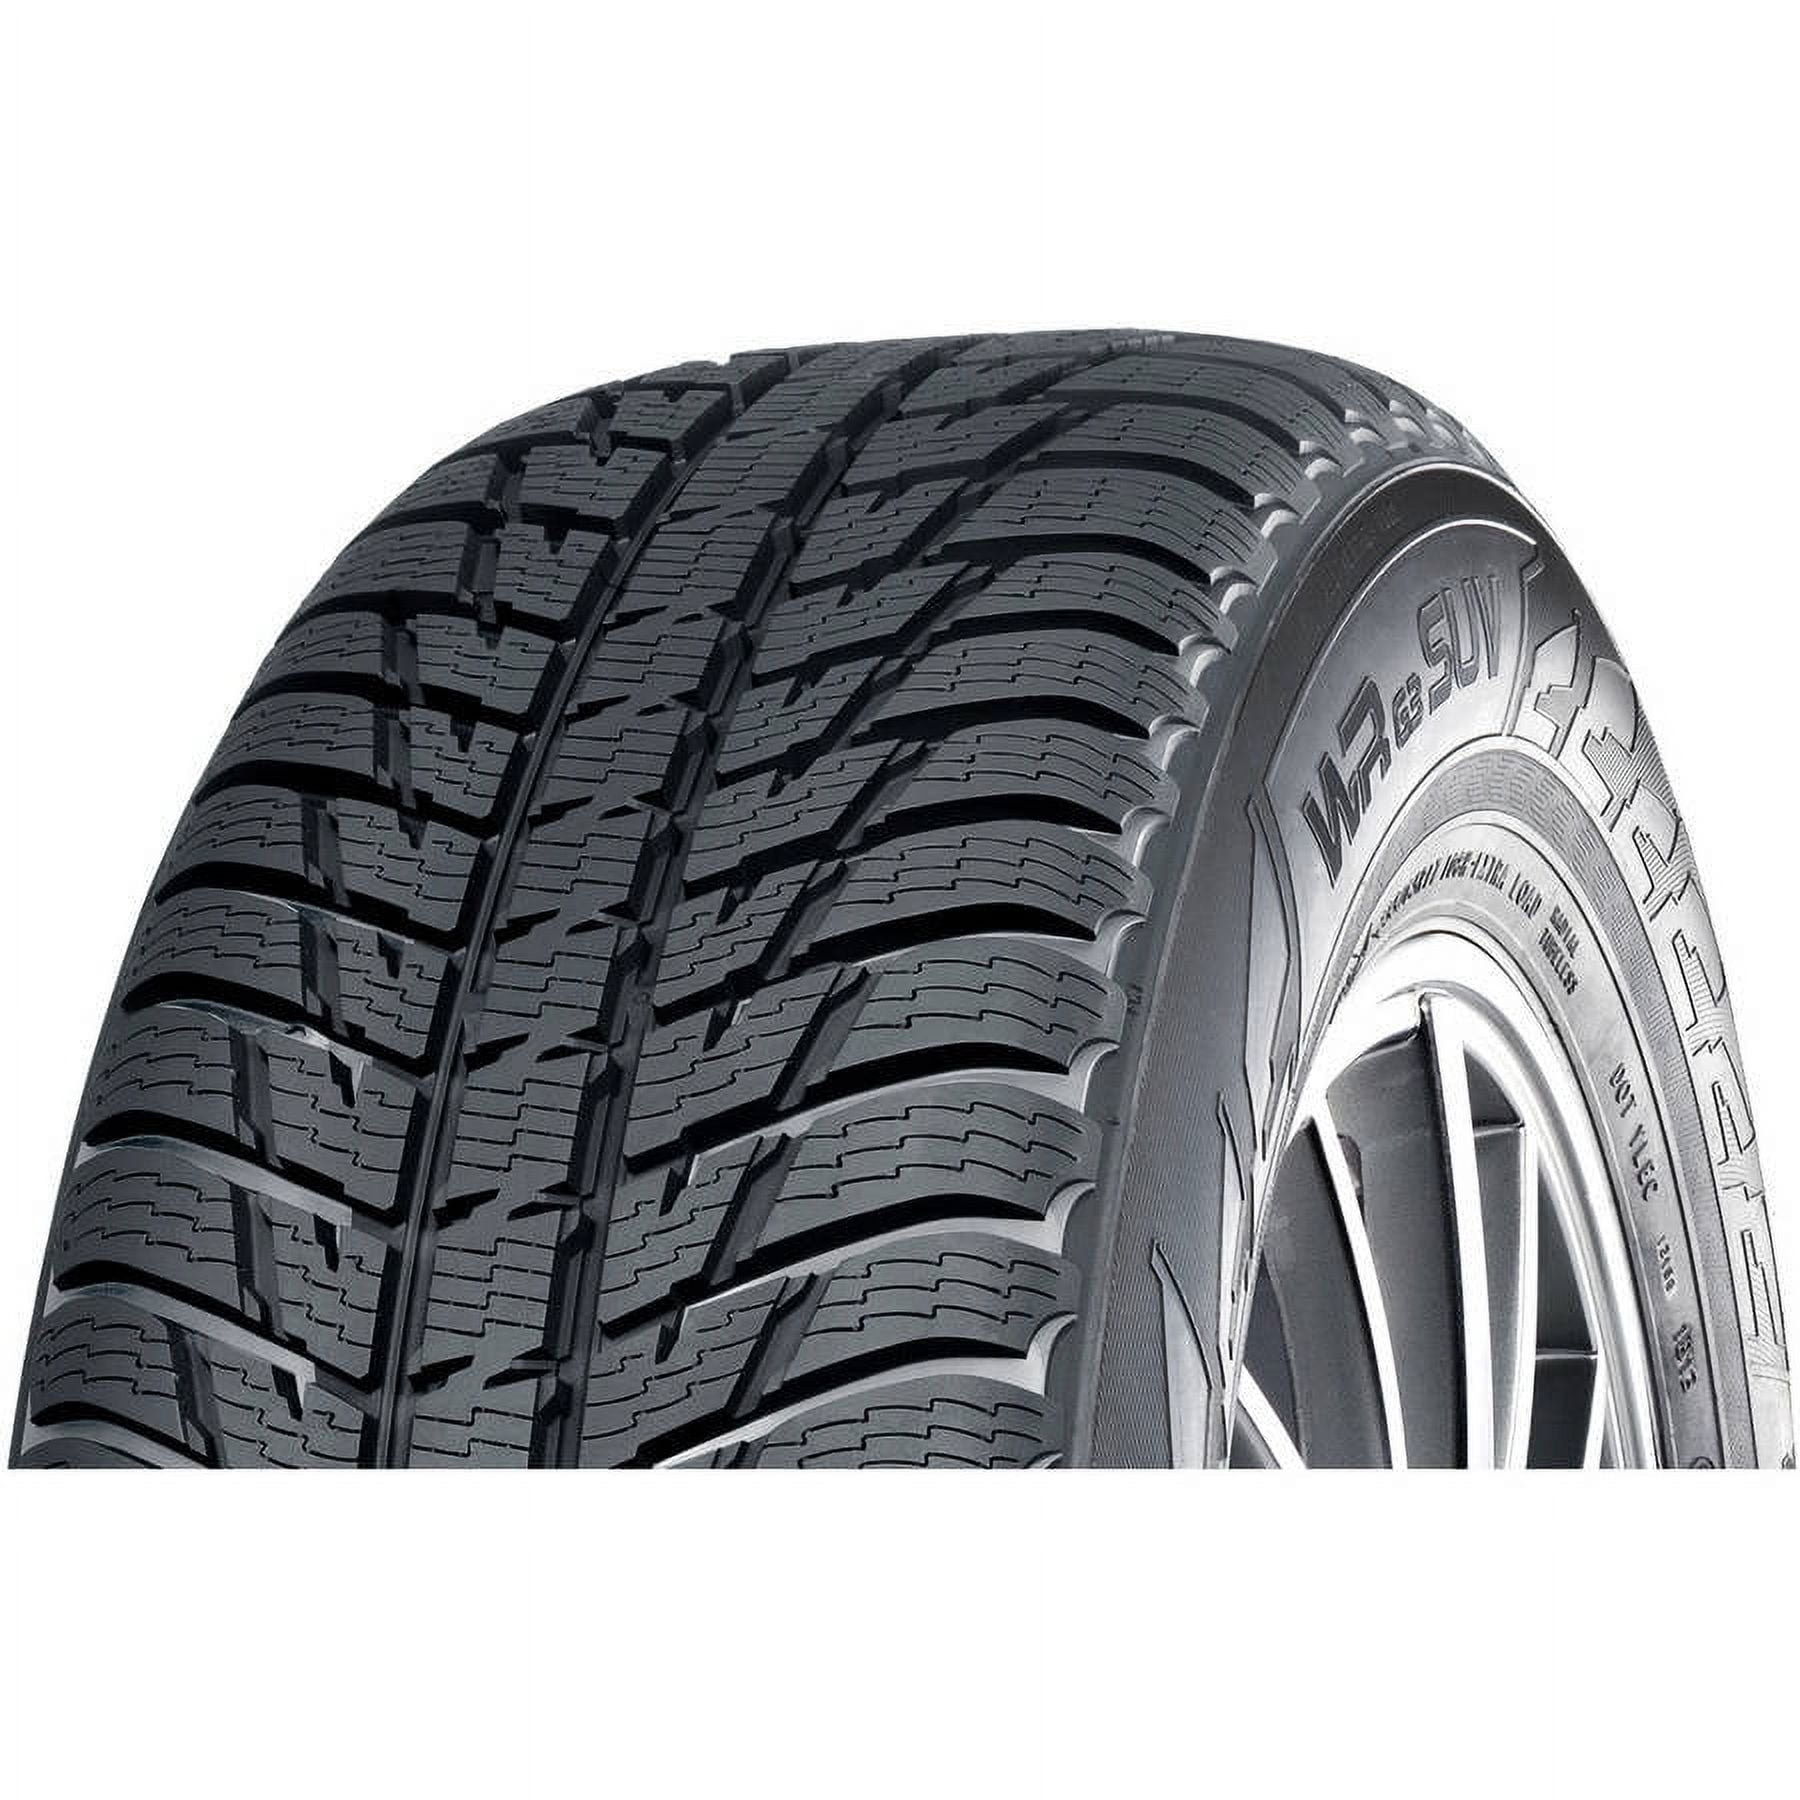 Nokian WRG3 SUV 215/65R16 102 H Tire Fits: 2009-13 Subaru Forester X,  2017-22 Jeep Renegade North